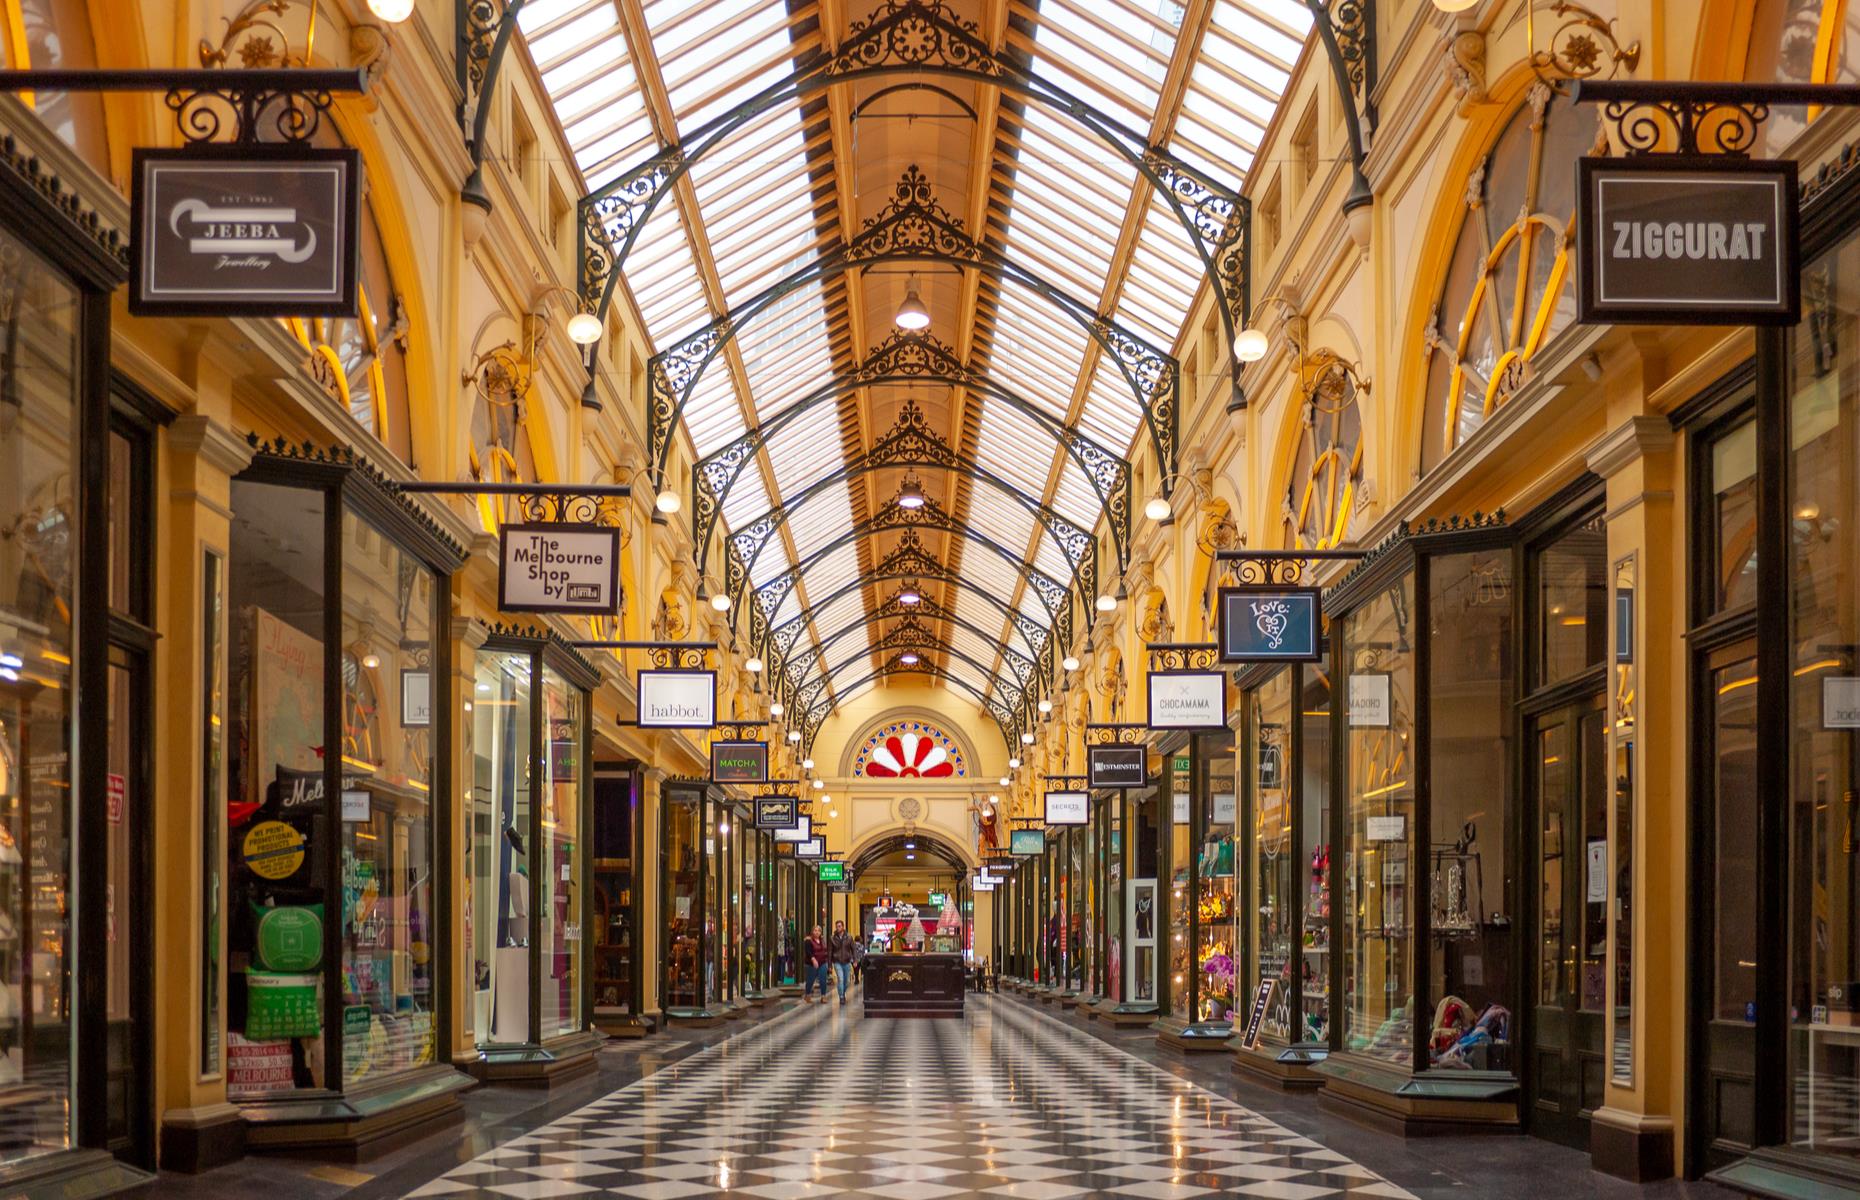 This splendid Victorian-era arcade could well be in London or Paris but it is in Melbourne’s CBD. Opened in 1870, the Royal Arcade was the first such structure to be built in the city and is the longest-standing example in all of Australia. One of the shopping arcade's most striking features is its clock. Known as Gaunt’s Clock, it is flanked either side by the mythical figures of Gog and Magog. These giant statues have struck the chimes on the hour since 1892.